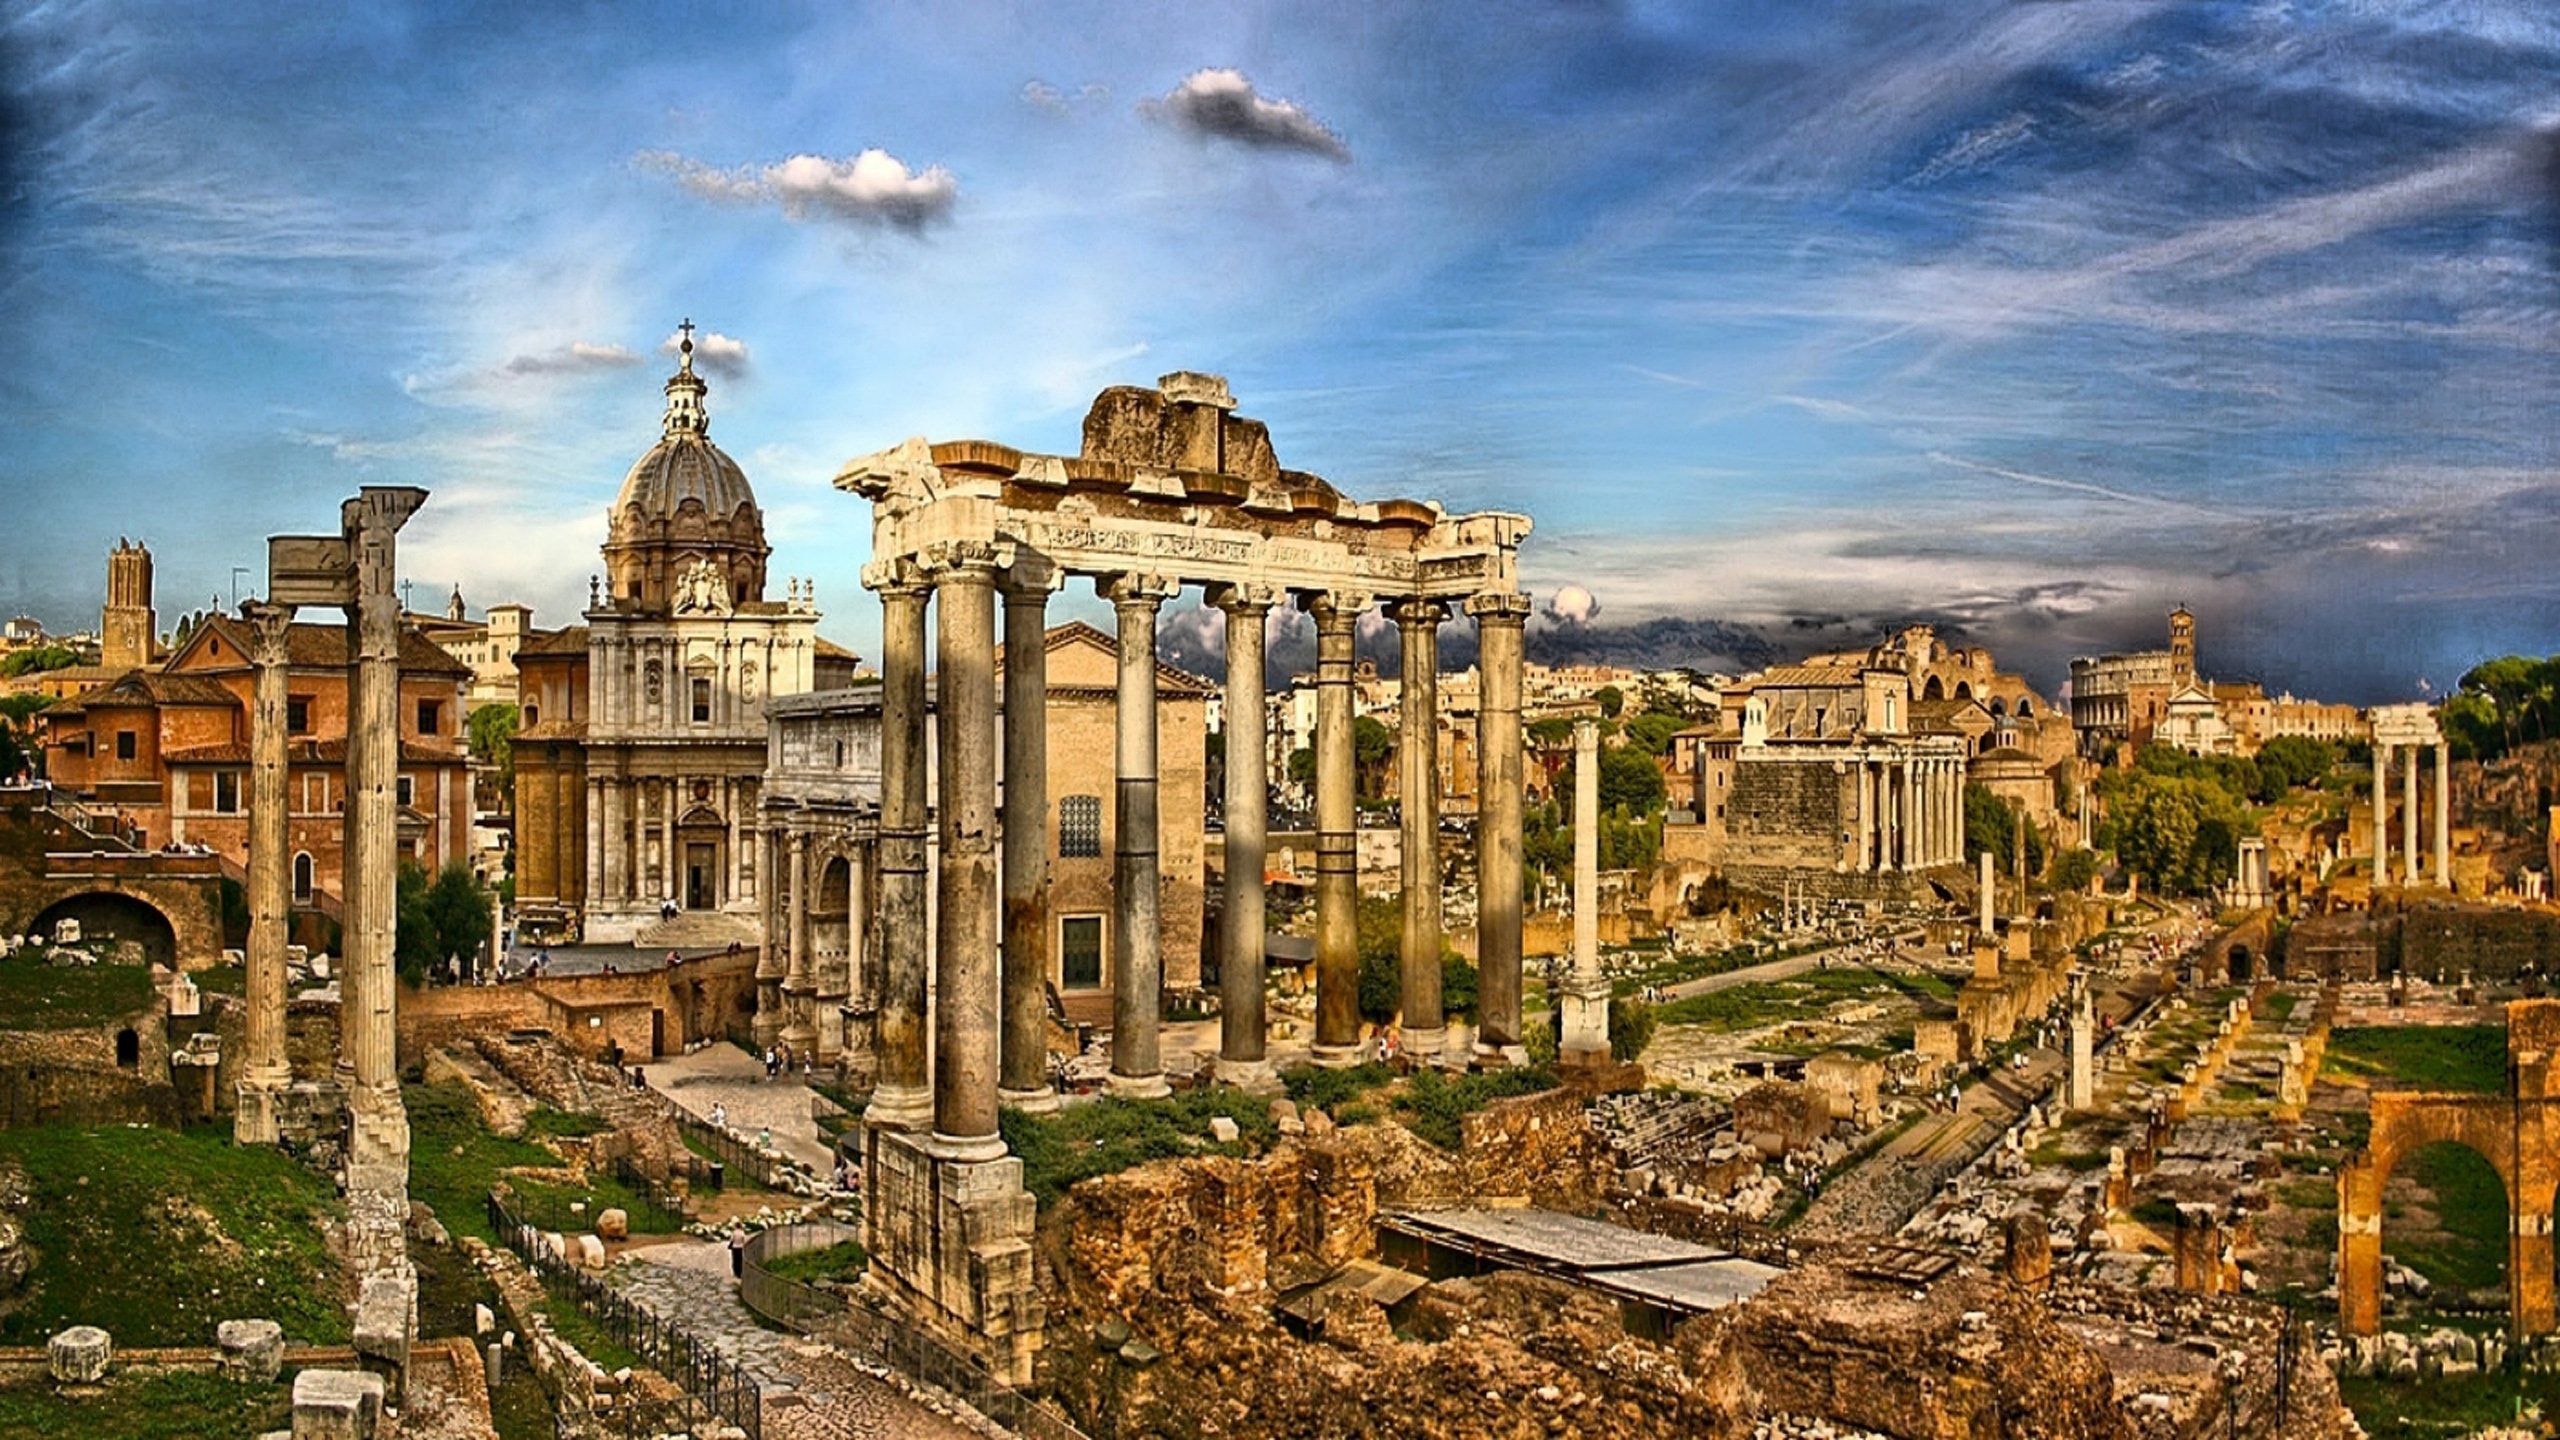  Italy Architecture Rome Ruins Hd Wallpaper 1755890 Wallpapers13com